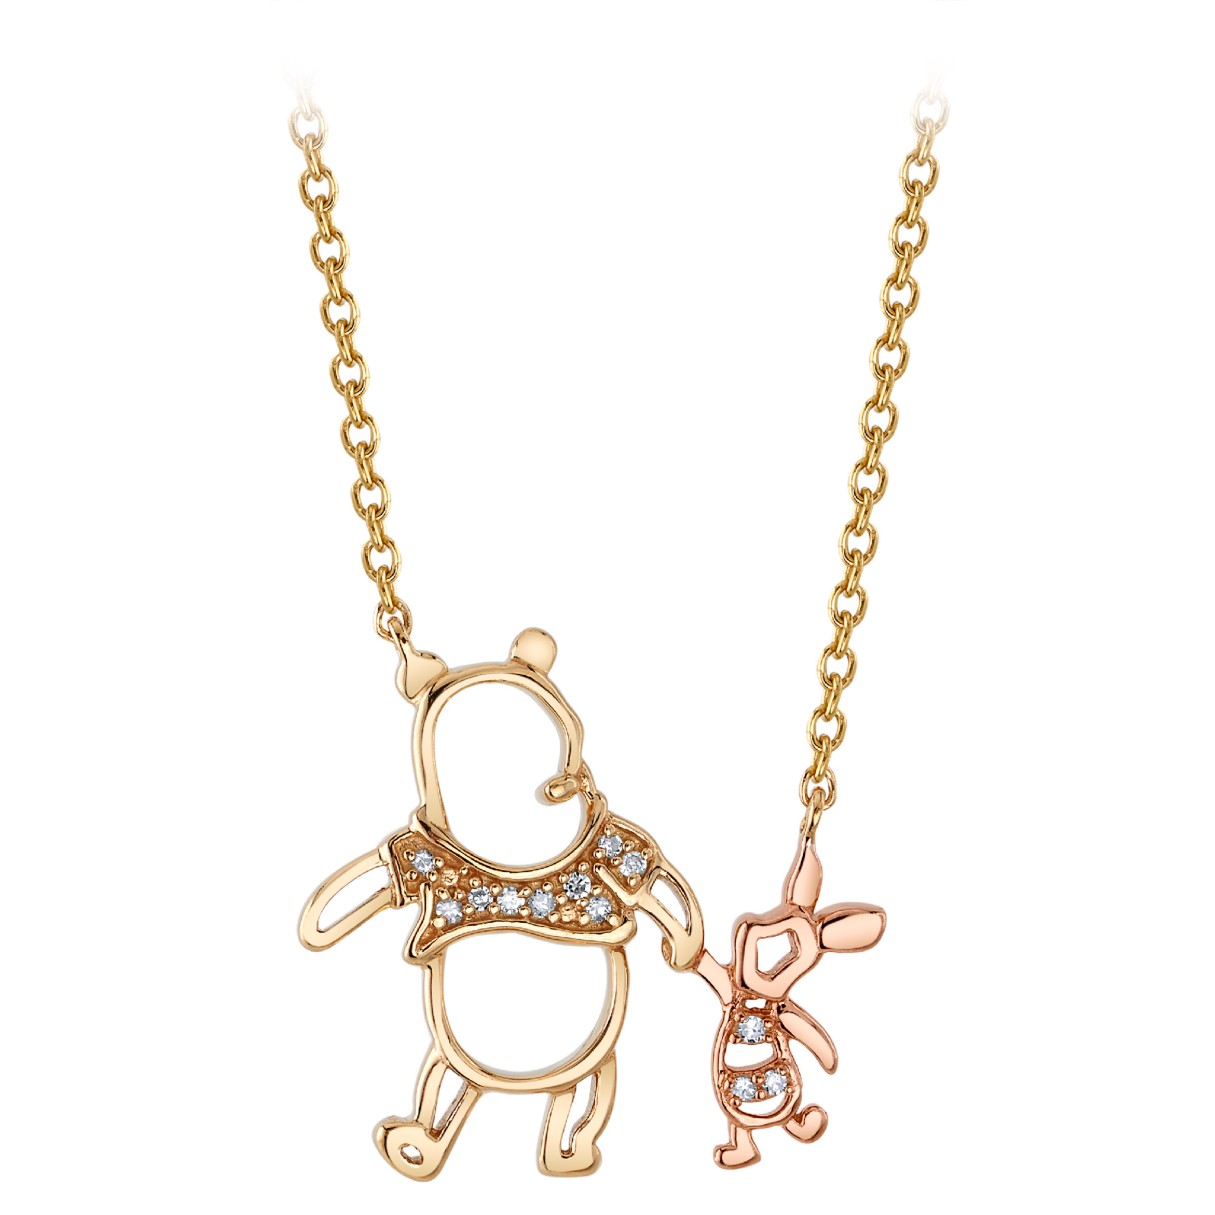 Winnie the Pooh and Piglet Diamond Necklace